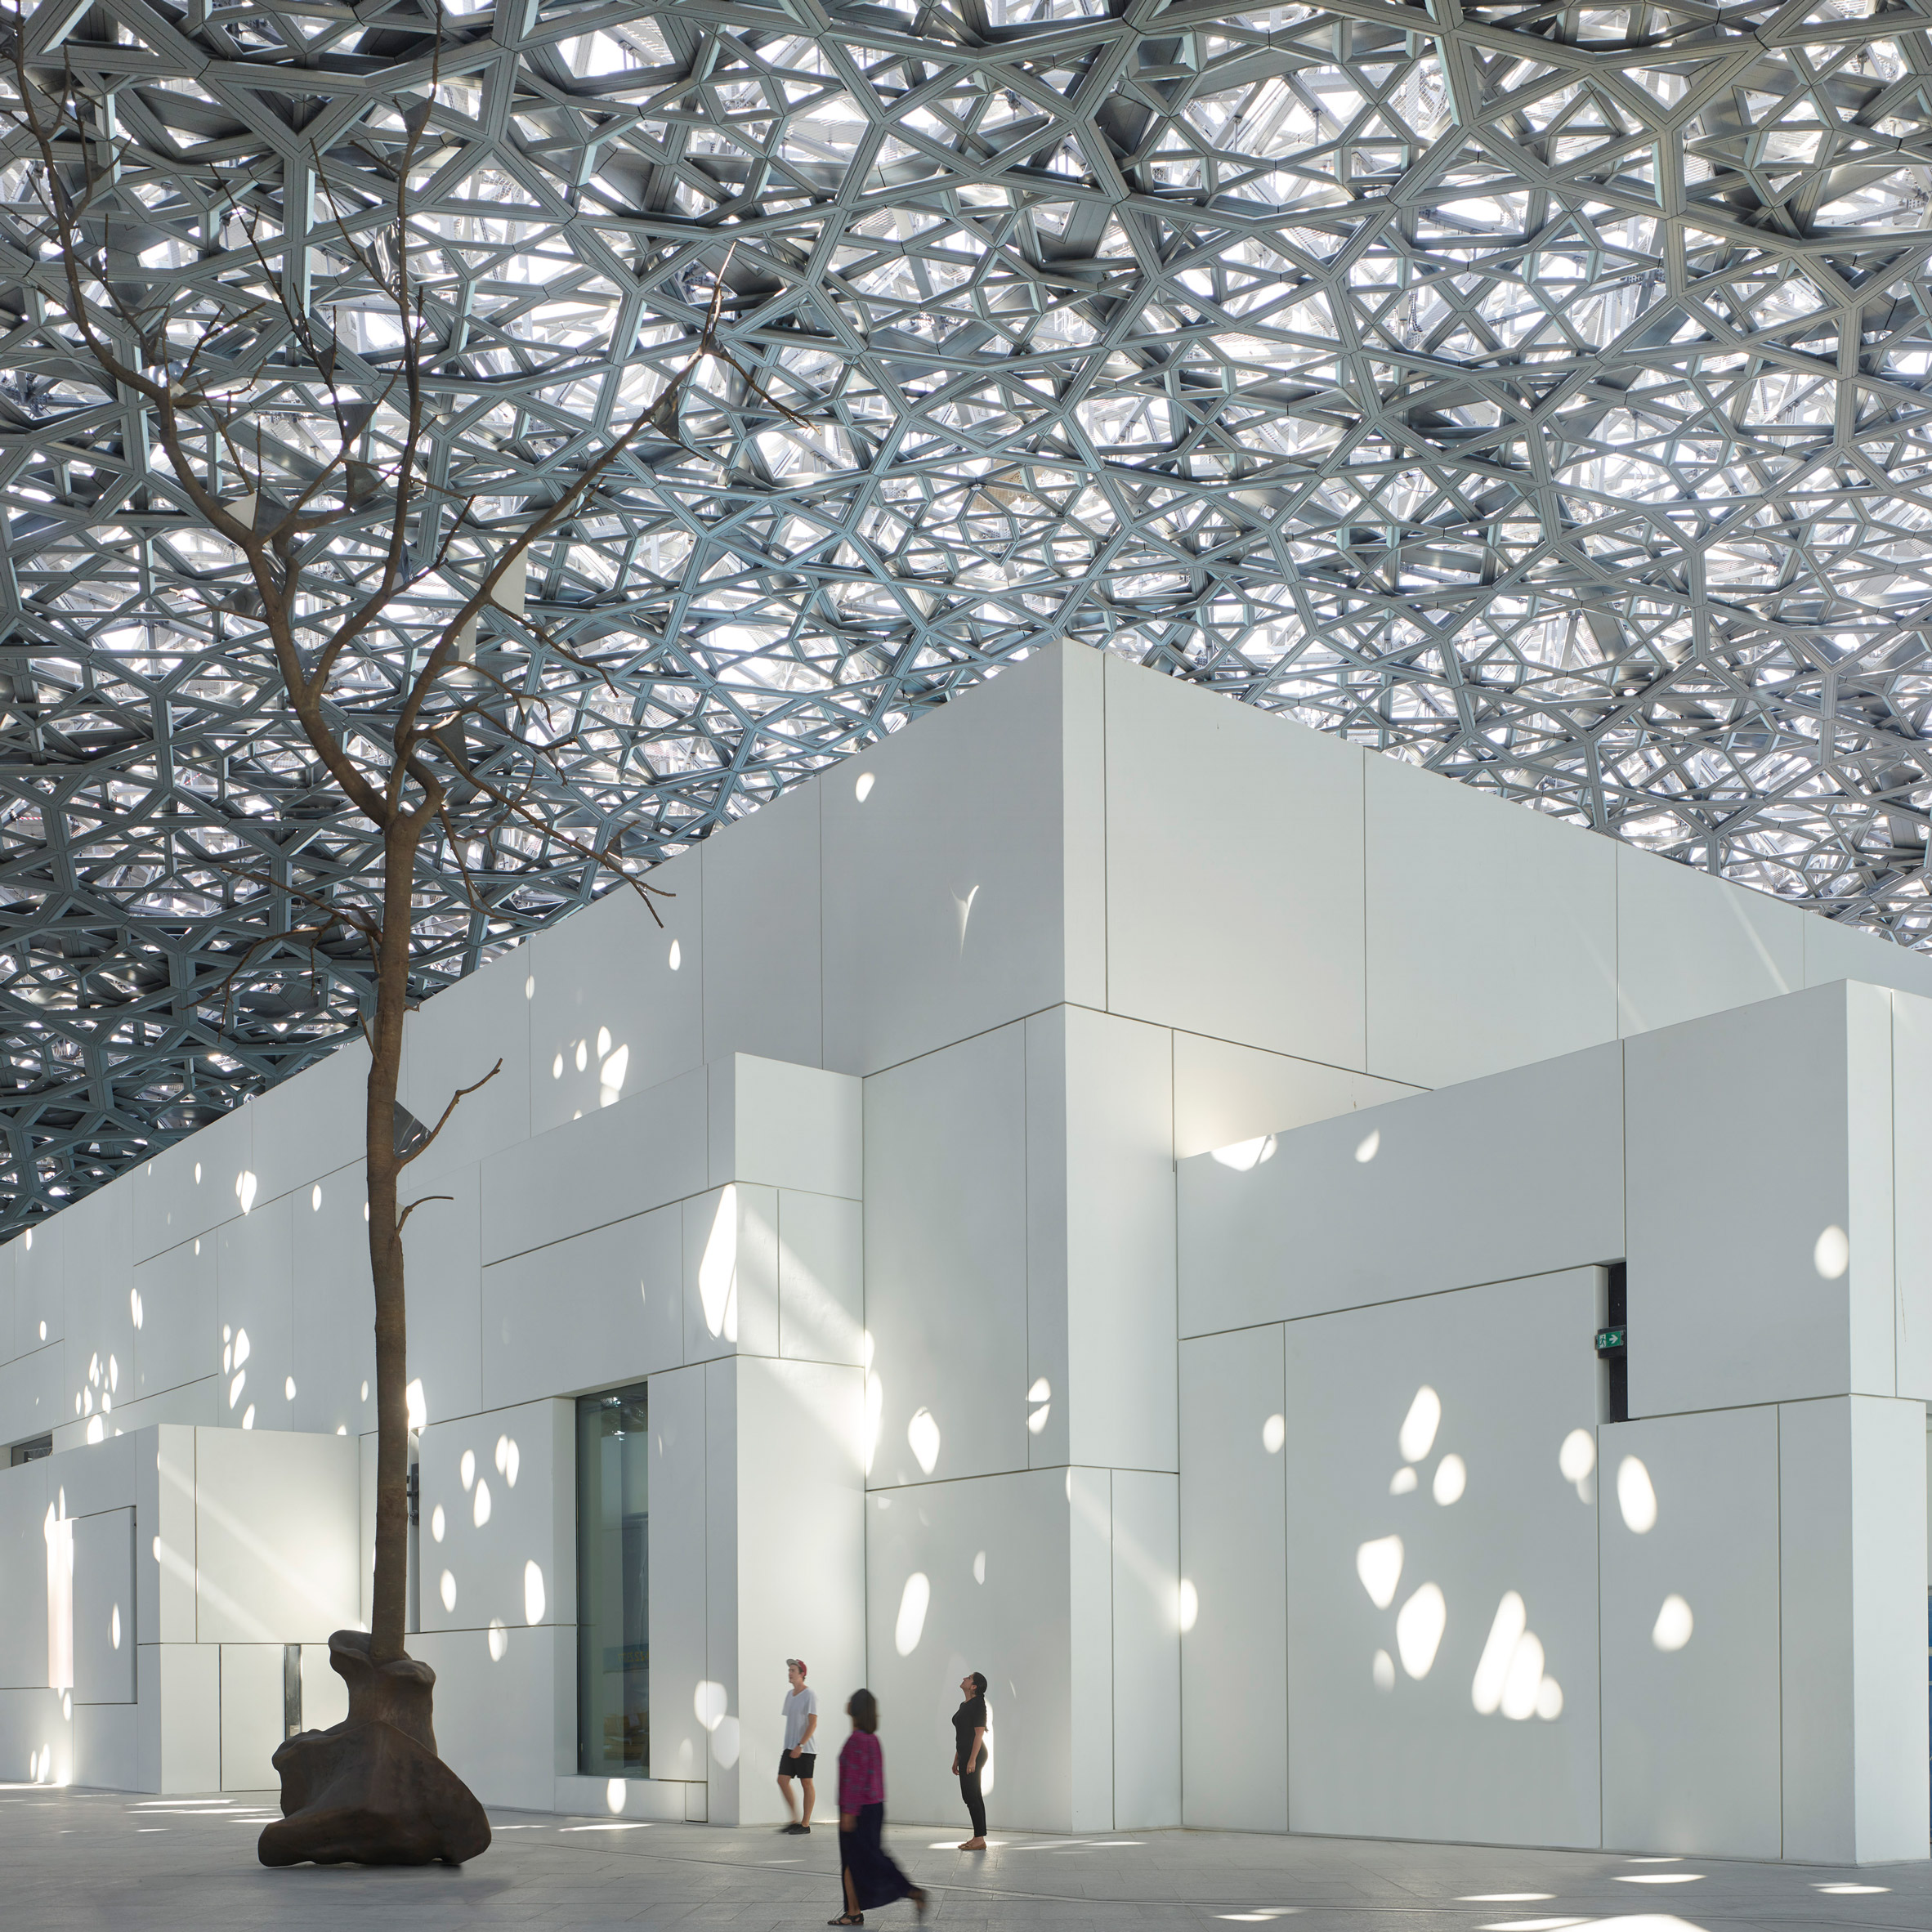 Jean Nouvel's Louvre Abu Dhabi features a huge patterned dome-0